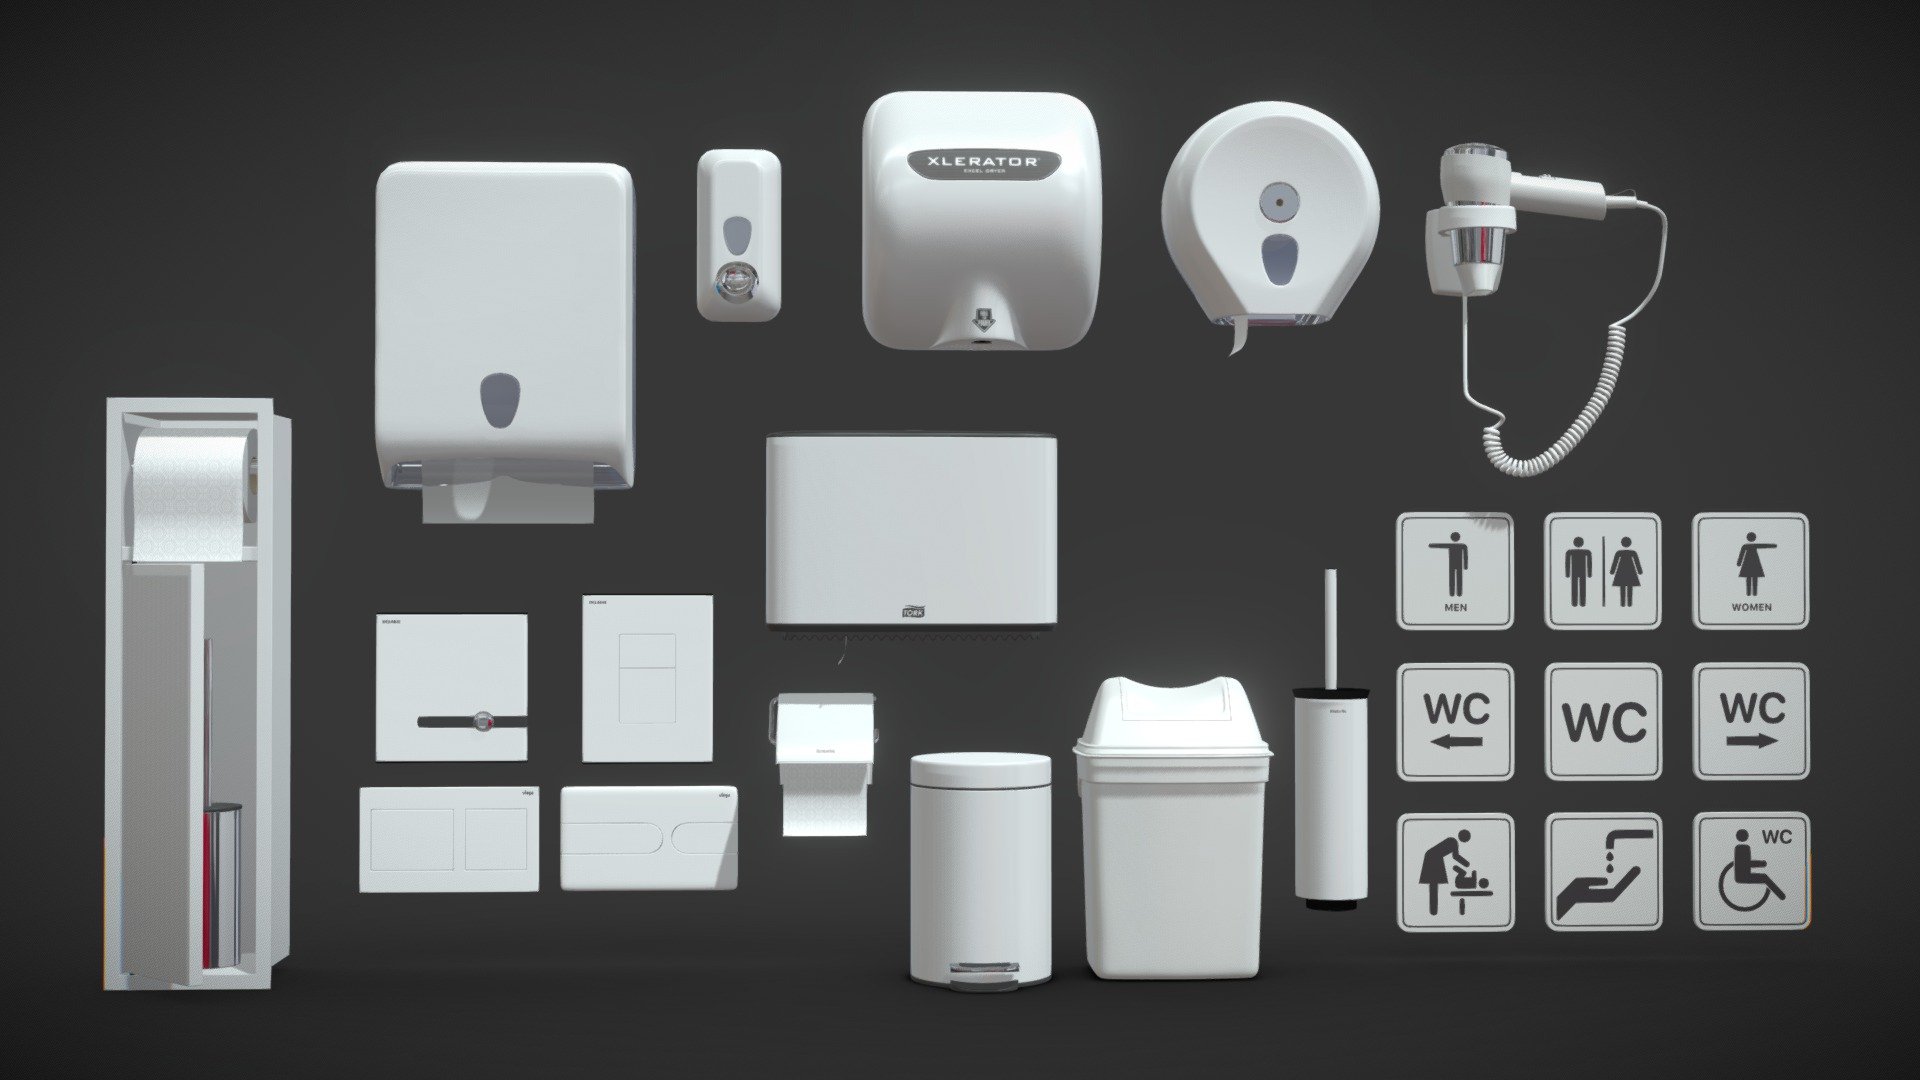 Realistic (copy) 3d model of Public toilet accessories white set 153.

This set:




1 file obj standard

1 file 3ds Max 2013 vray material

1 file 3ds Max 2013 corona material

1 file 3ds Max 2013 standard material

1 file of 3Ds

1 file blender.

Topology of geometry:




forms and proportions of The 3D model

the geometry of the model was created very neatly

there are no many-sided polygons

detailed enough for close-up renders

the model optimized for turbosmooth modifier

Not collapsed the turbosmooth modified

apply the Smooth modifier with a parameter to get the desired level of detail

In the archive:




Black XLERATOR hand dryer

Flush buttons for installation Viega, Delabie

Trash can with pedal and lid HEWI

Trash can Katrin

Toilet brush with holder Brabantia

Mar Plast liquid soap dispenser

Mar Plast toilet paper dispenser

Tork toilet paper dispenser

Mar Plast toilet towel dispenser

Hairdryer ODF

Brabantia toilet paper holder

A set of plates on the door
 - Public toilet accessories white set 153 - Buy Royalty Free 3D model by madMIX 3d model